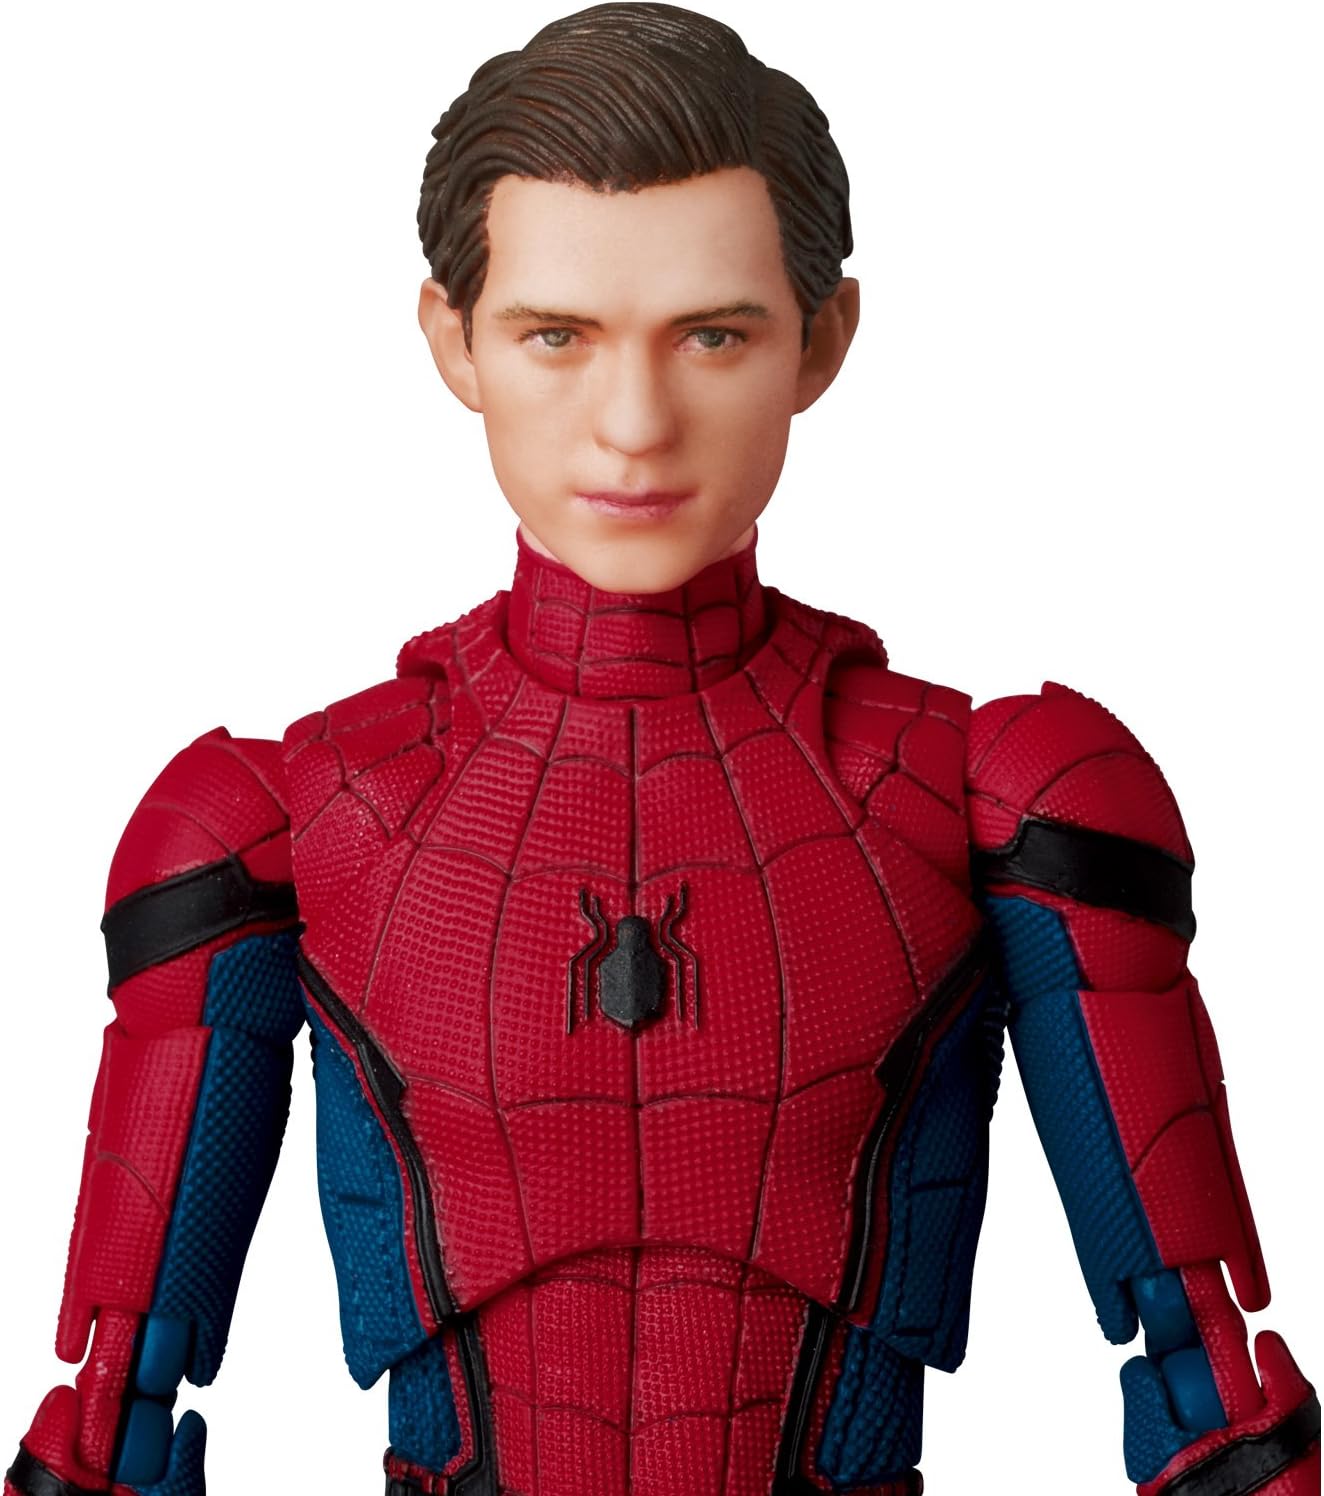 MAFEX No.047 MAFEX SPIDER-MAN (HOMECOMING Ver.) from "Spider-Man: Homecoming" | animota